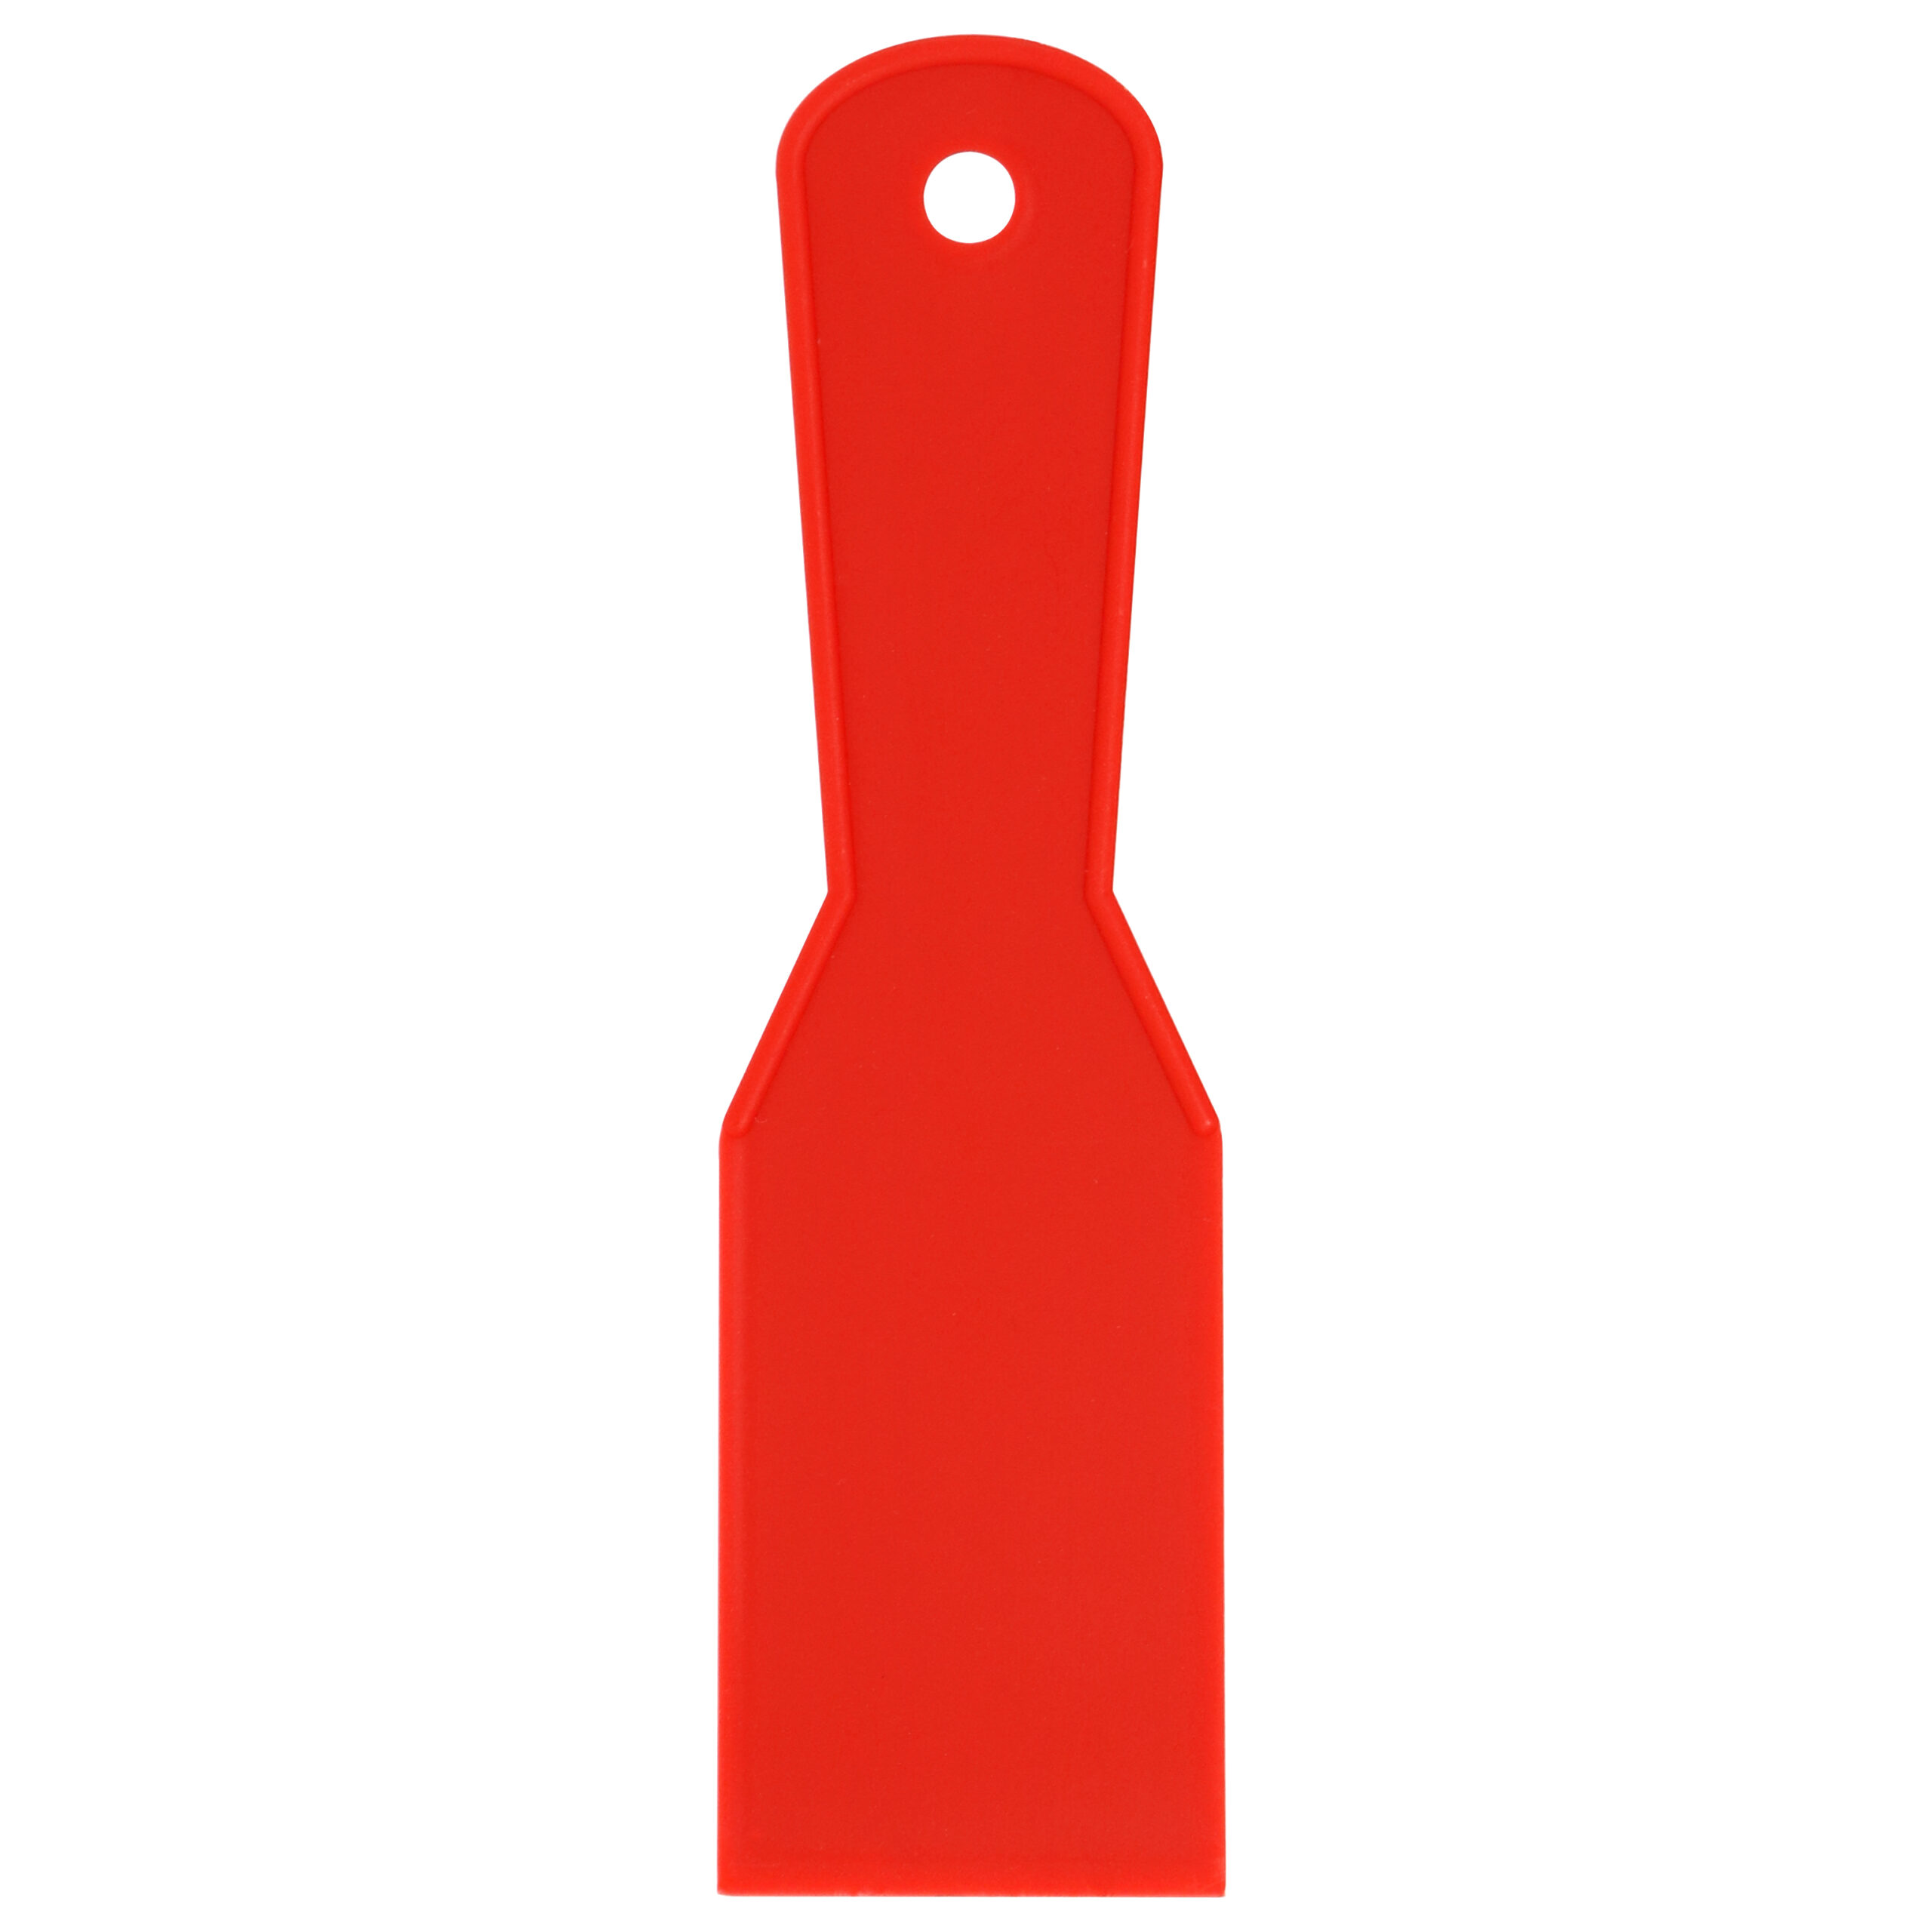 Red Plastic Putty Knife